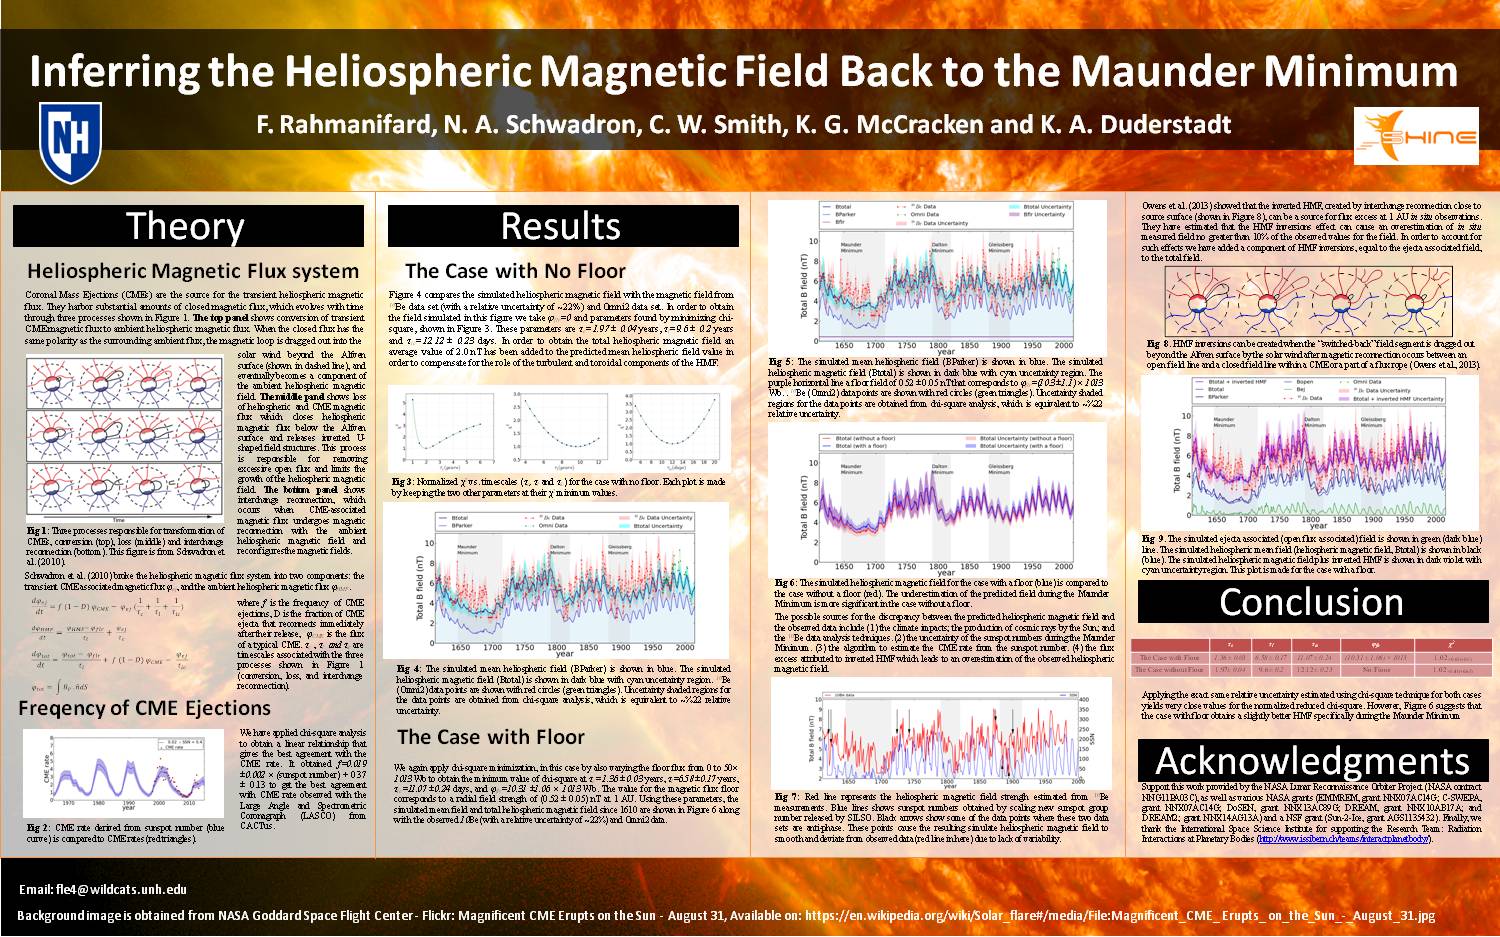 Inferring The Heliospheric Magnetic Field Back To The Maunder Minimum by frahmanif